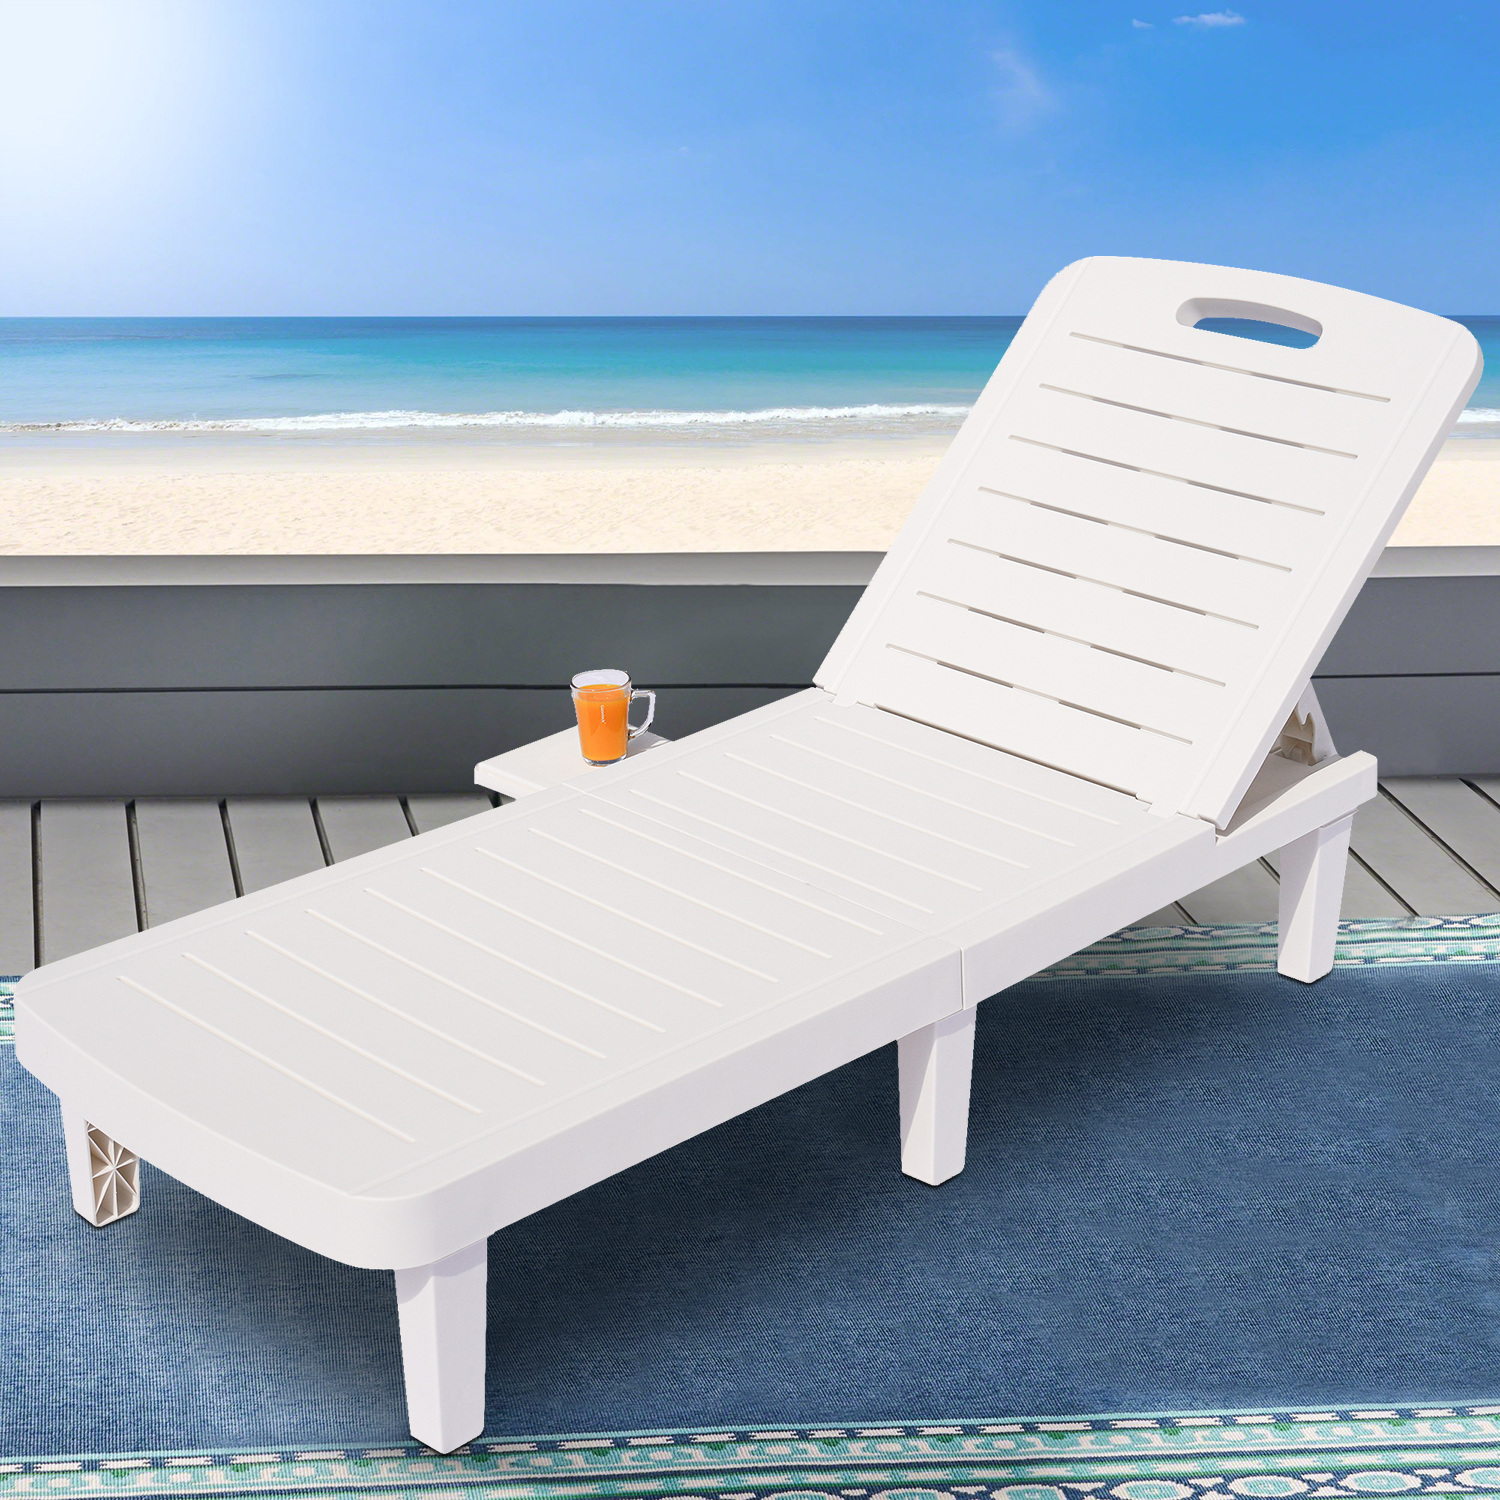 Outdoor Chaise Lounger, Single Patio Chaise Lounge Chair Furniture Set with Adjustable Back and Retractable Tray, All-Weather Plastic Reclining Lounge Chair for Beach, Backyard, Porch, Garden, Pool, L - image 1 of 9